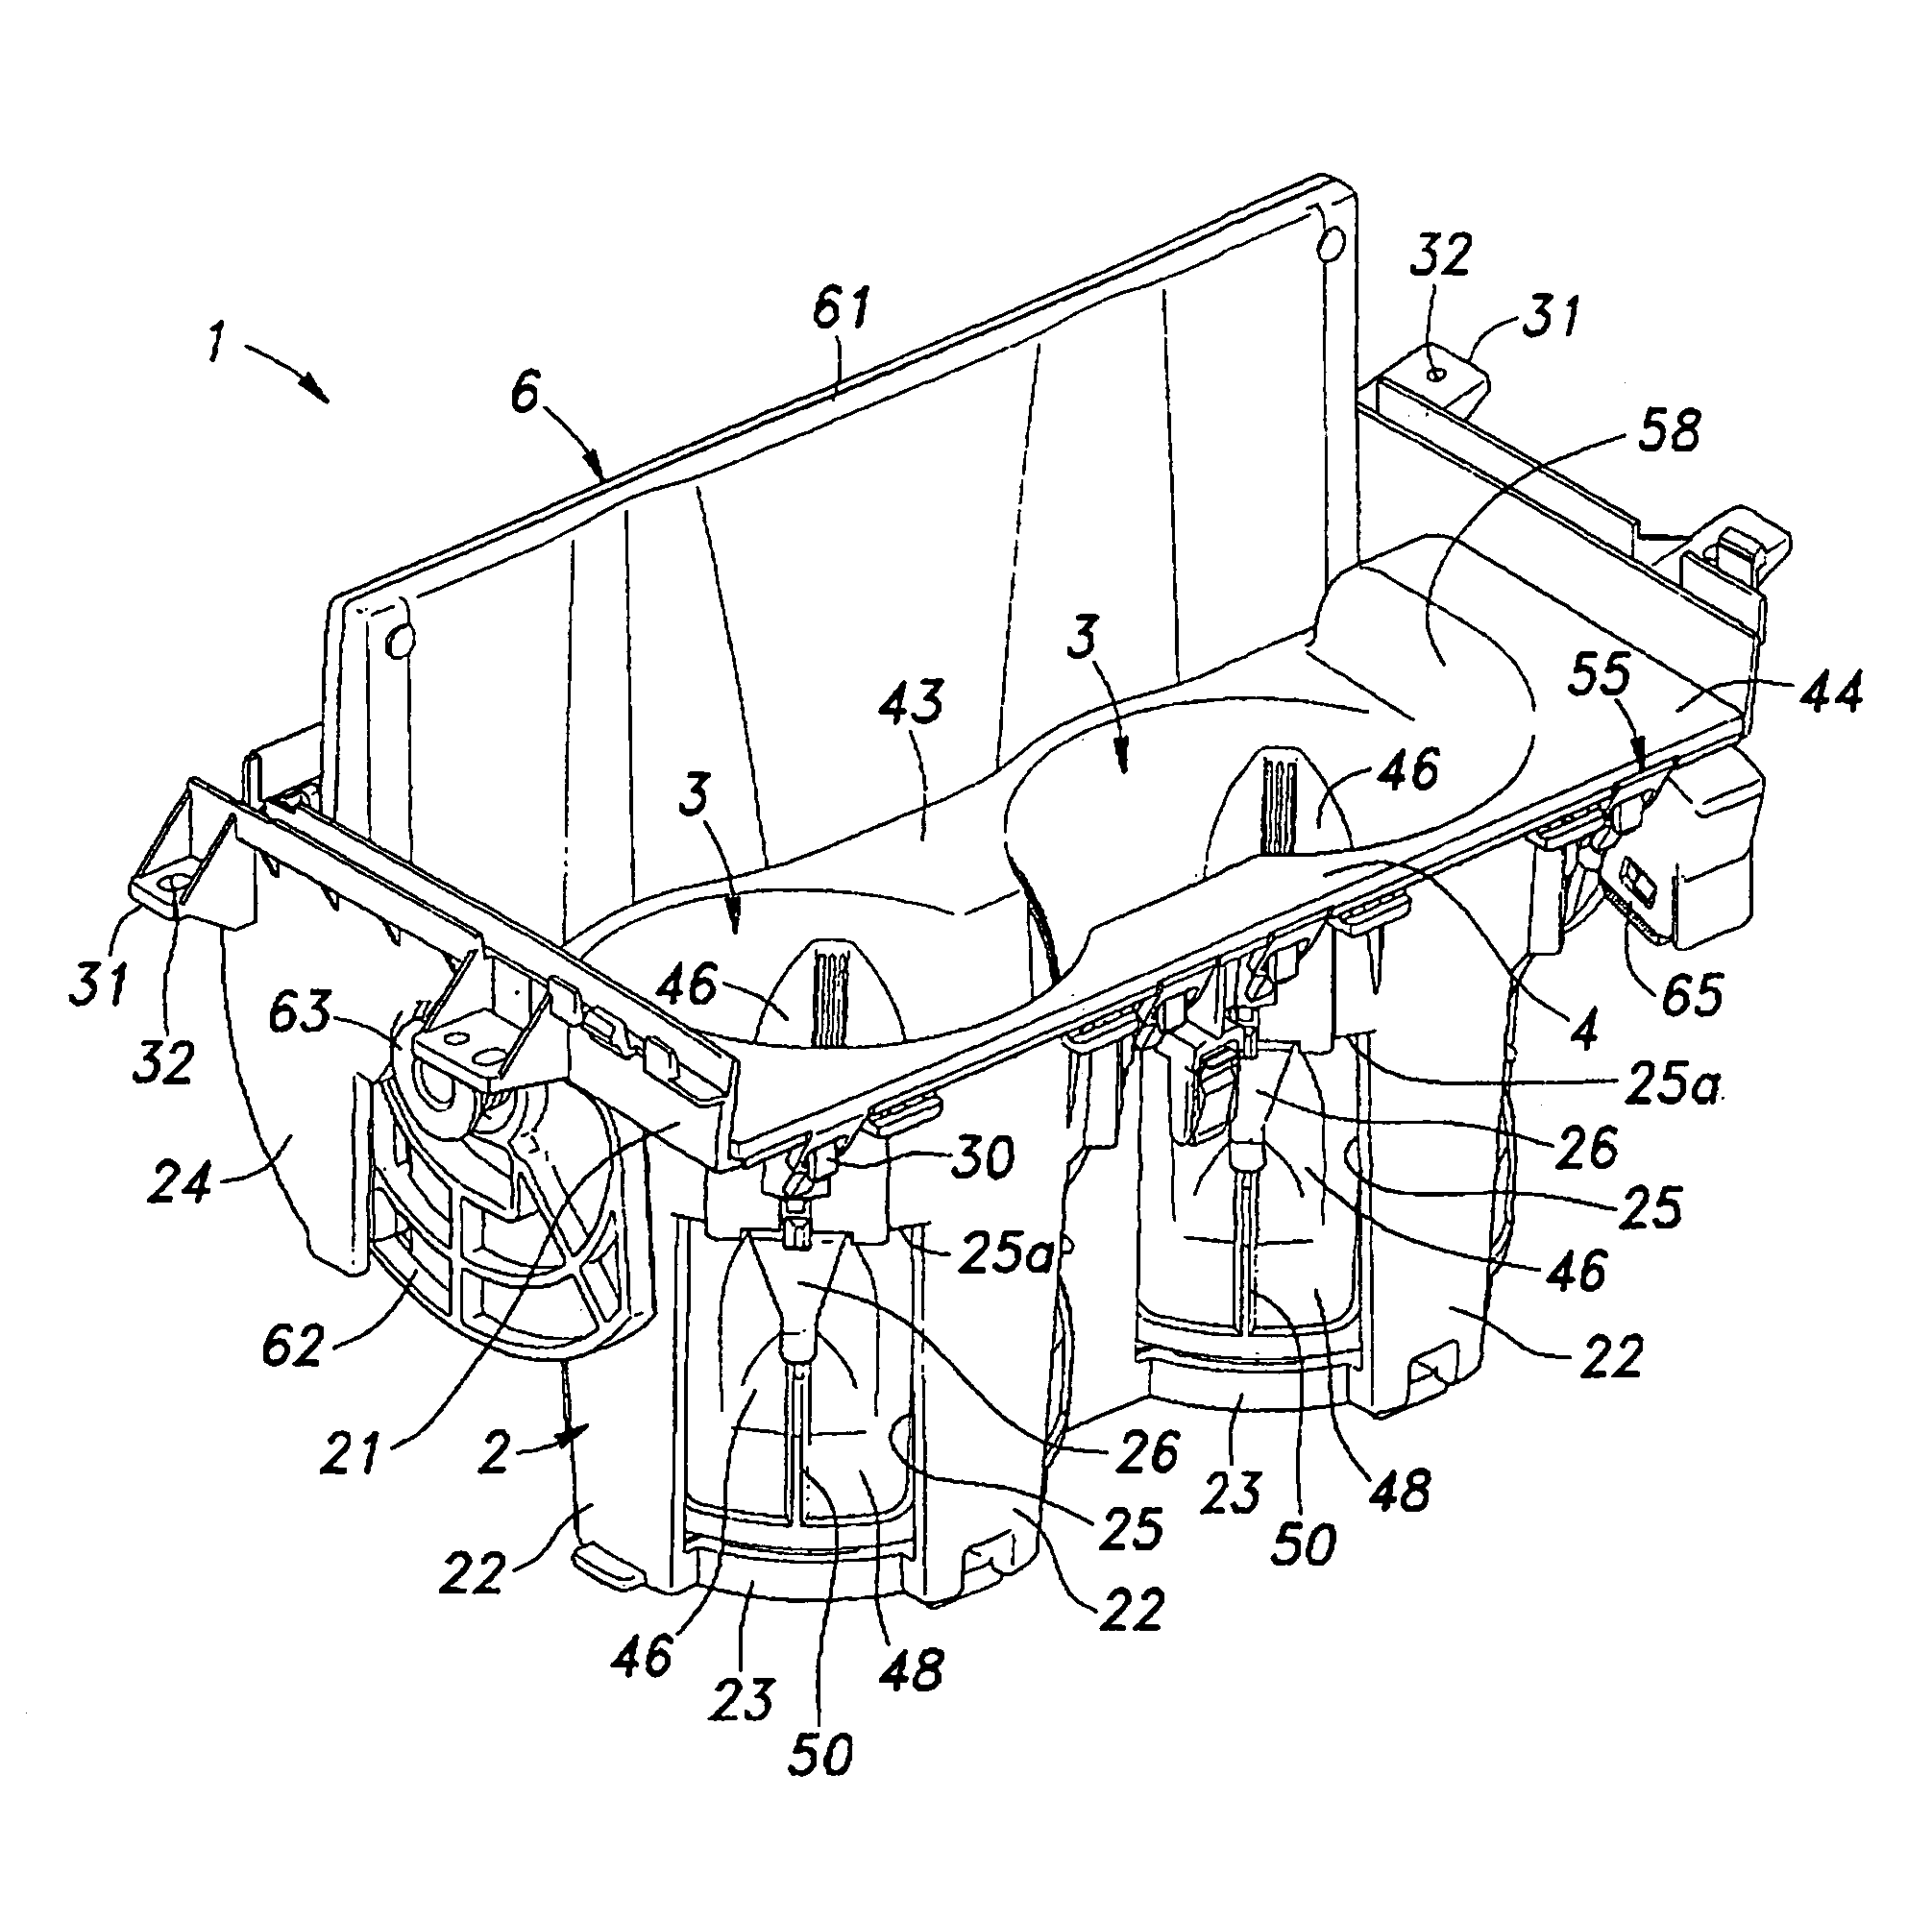 Cup holder with flexible protruding portion